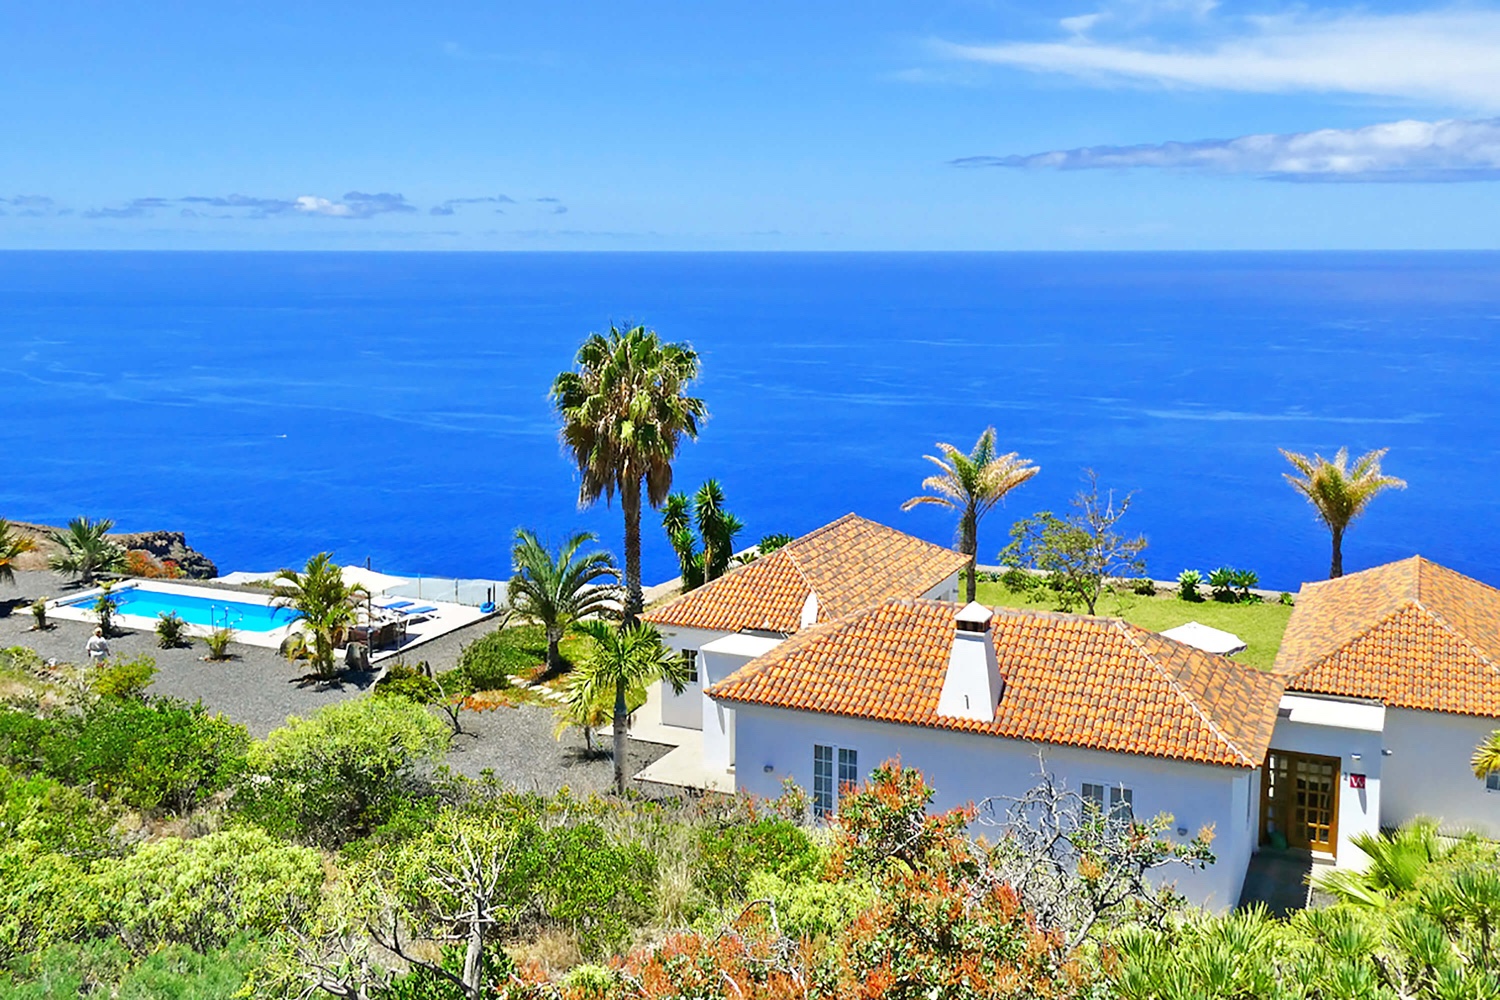 Very nice modern villa with private pool and stunning panoramic views of the Atlantic Ocean. The very well equipped holiday home is ideal for a La Palma vacation with all comfort.